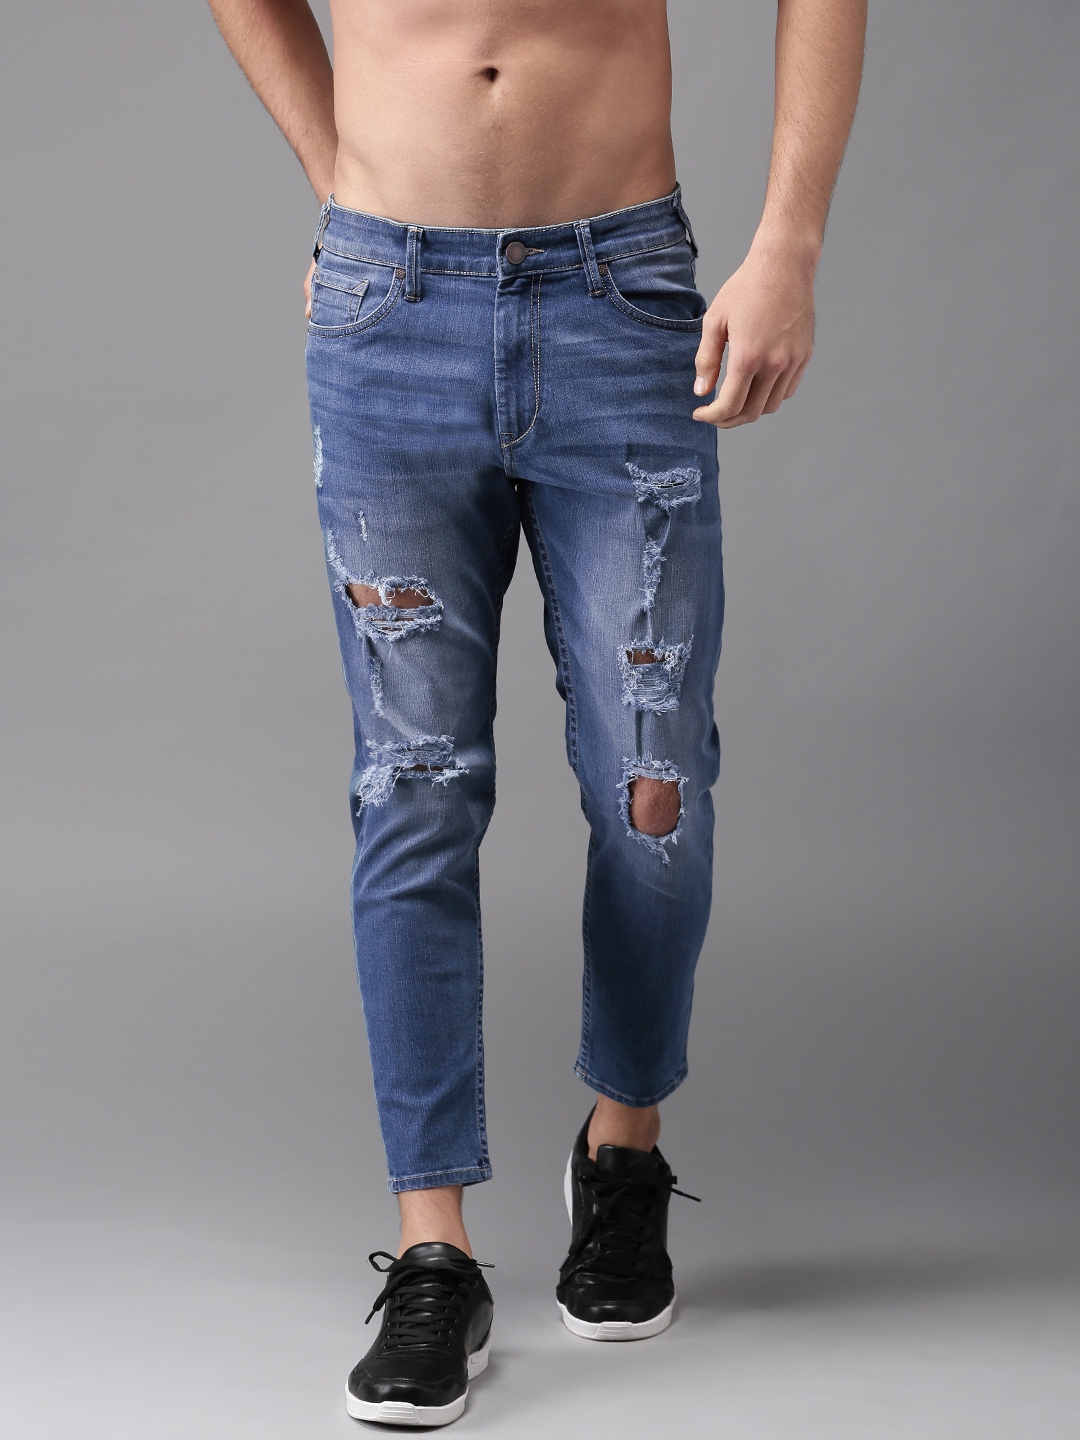 Ripped Men Ankle Length Jeans, Blue at Rs 699/piece in New Delhi